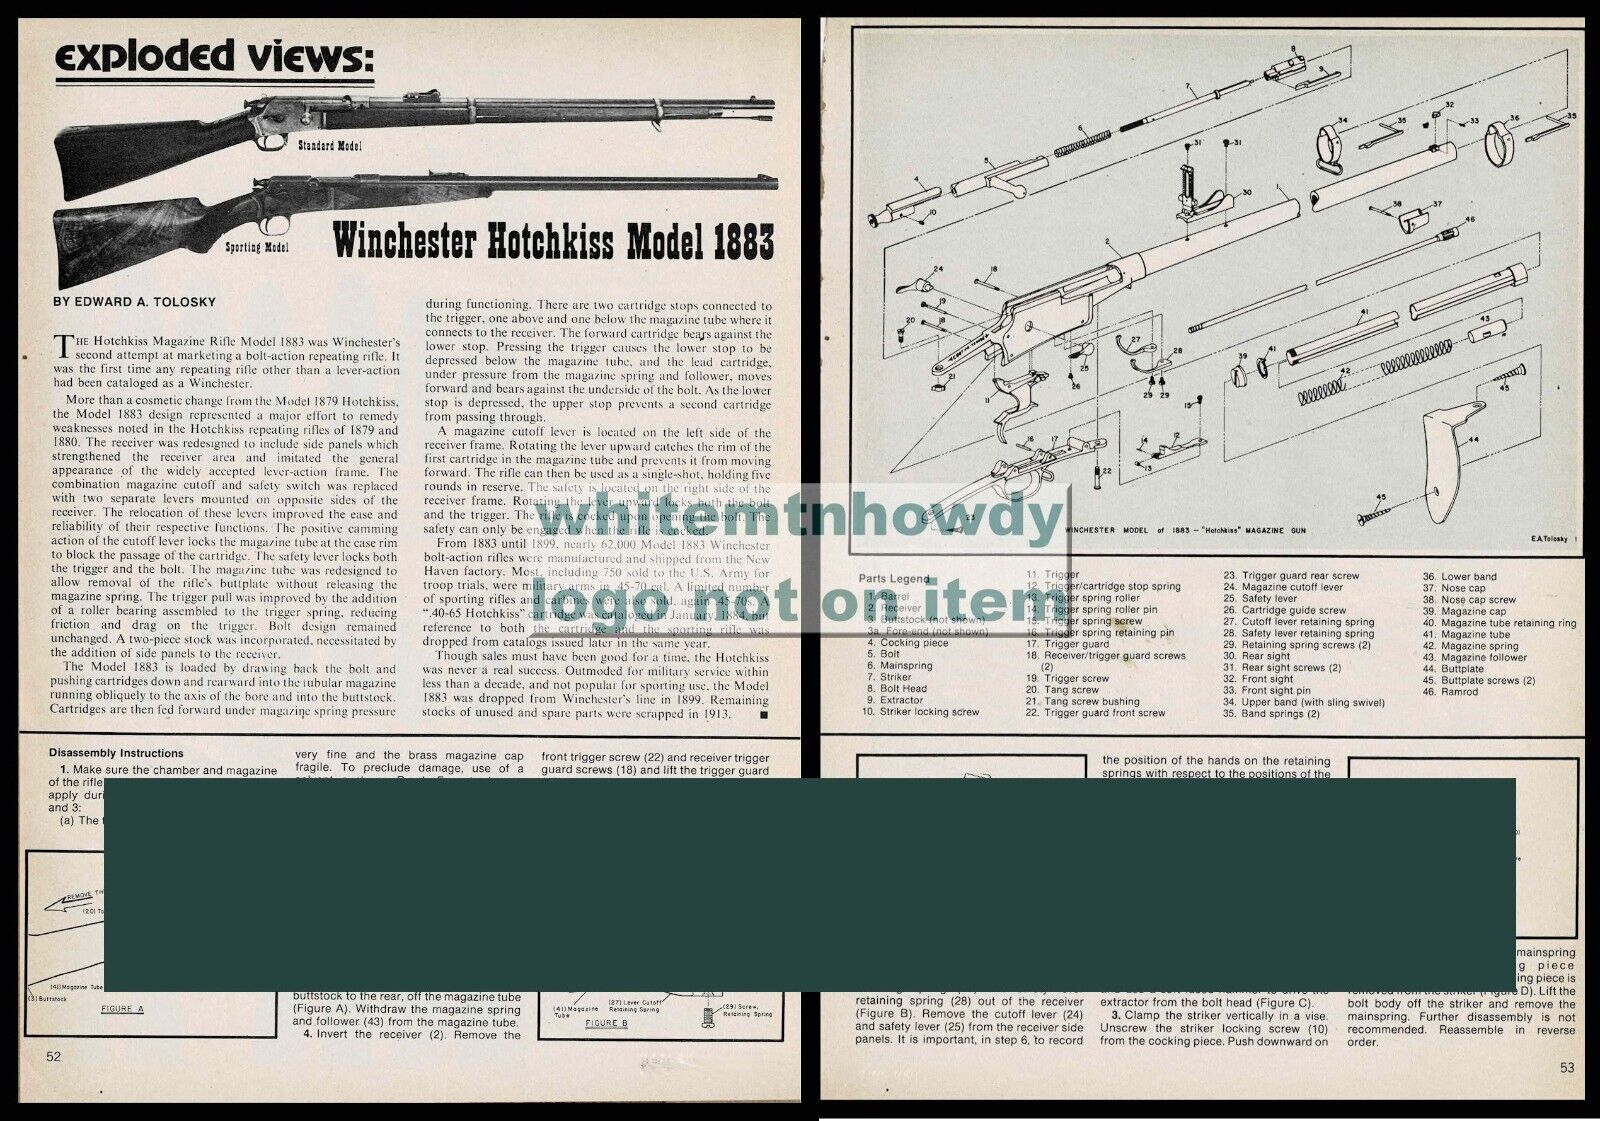 1981 WINCHESTER HOTCHKISS 1883 Rifle Schematic Parts List Assembly Artiicle